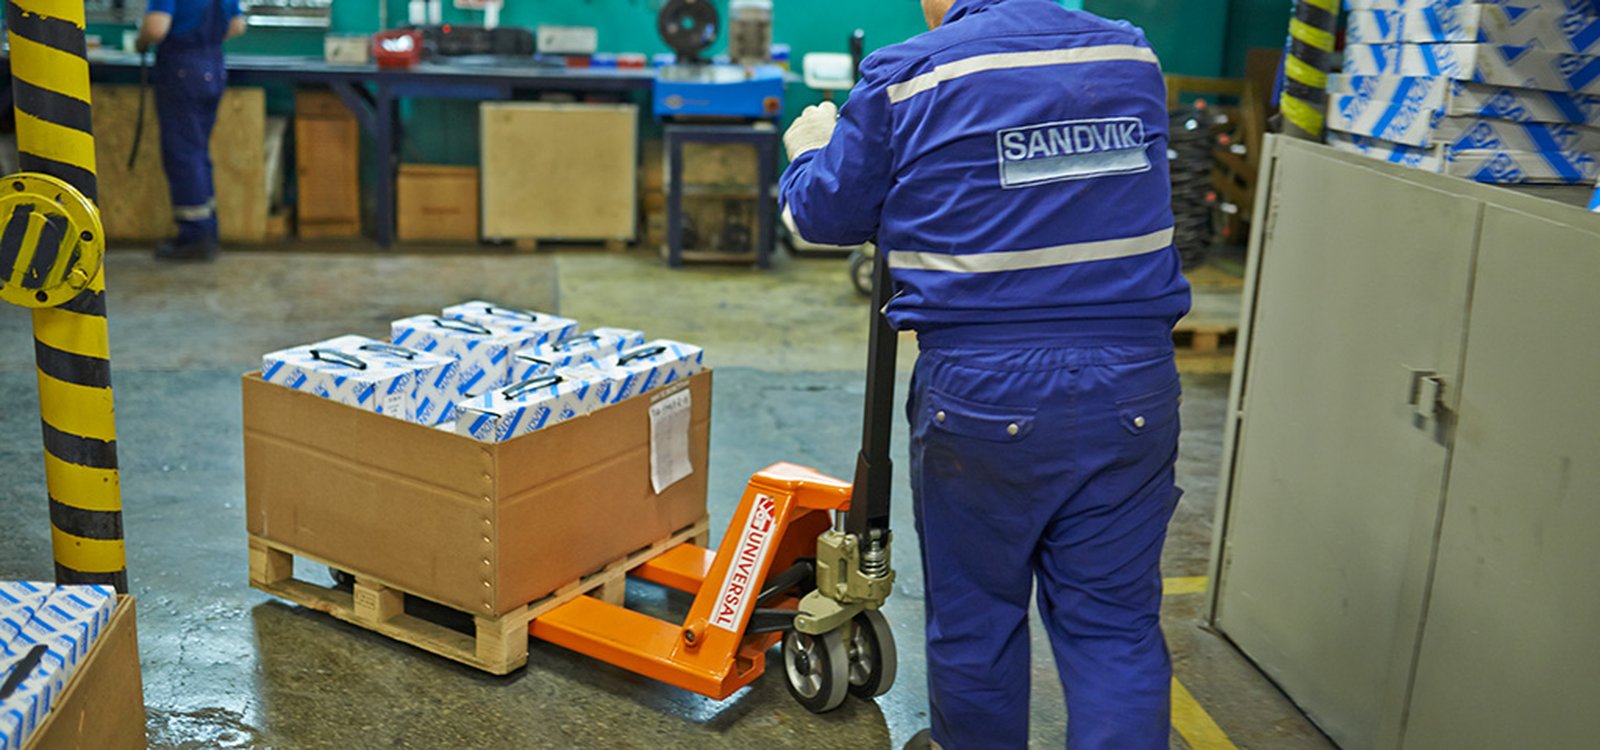 All spare parts reach Norilsk by sea or by air, which is why Sandvik must pay close attention to weather conditions while shipping.